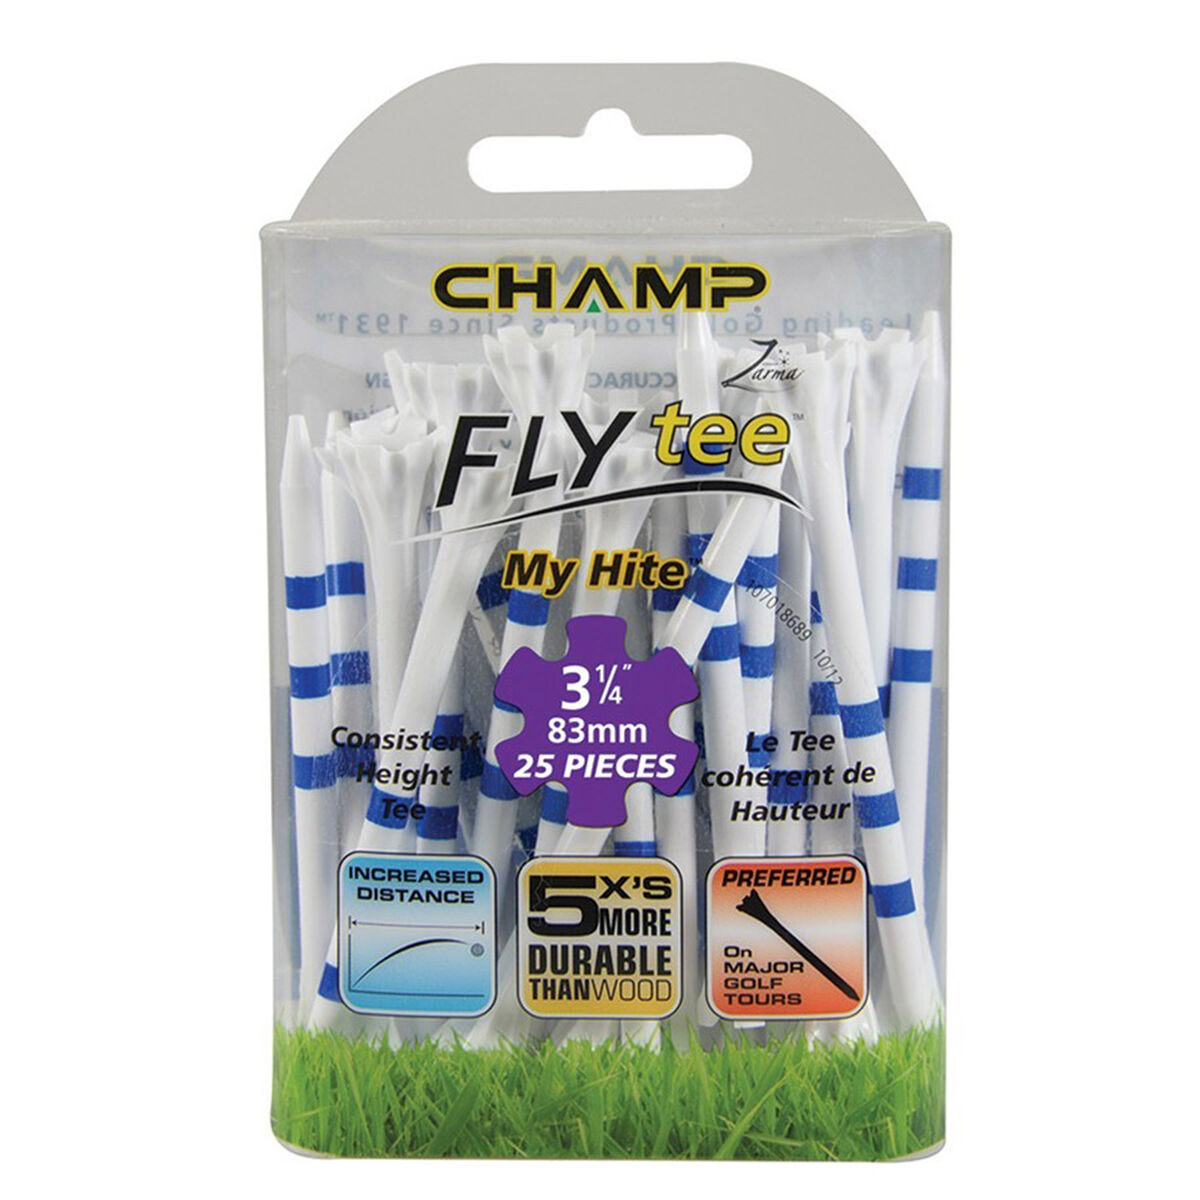 Champ White and Blue Stripe MyHite Fly Pack of 25 Golf Tees, Size: 83mm | American Golf